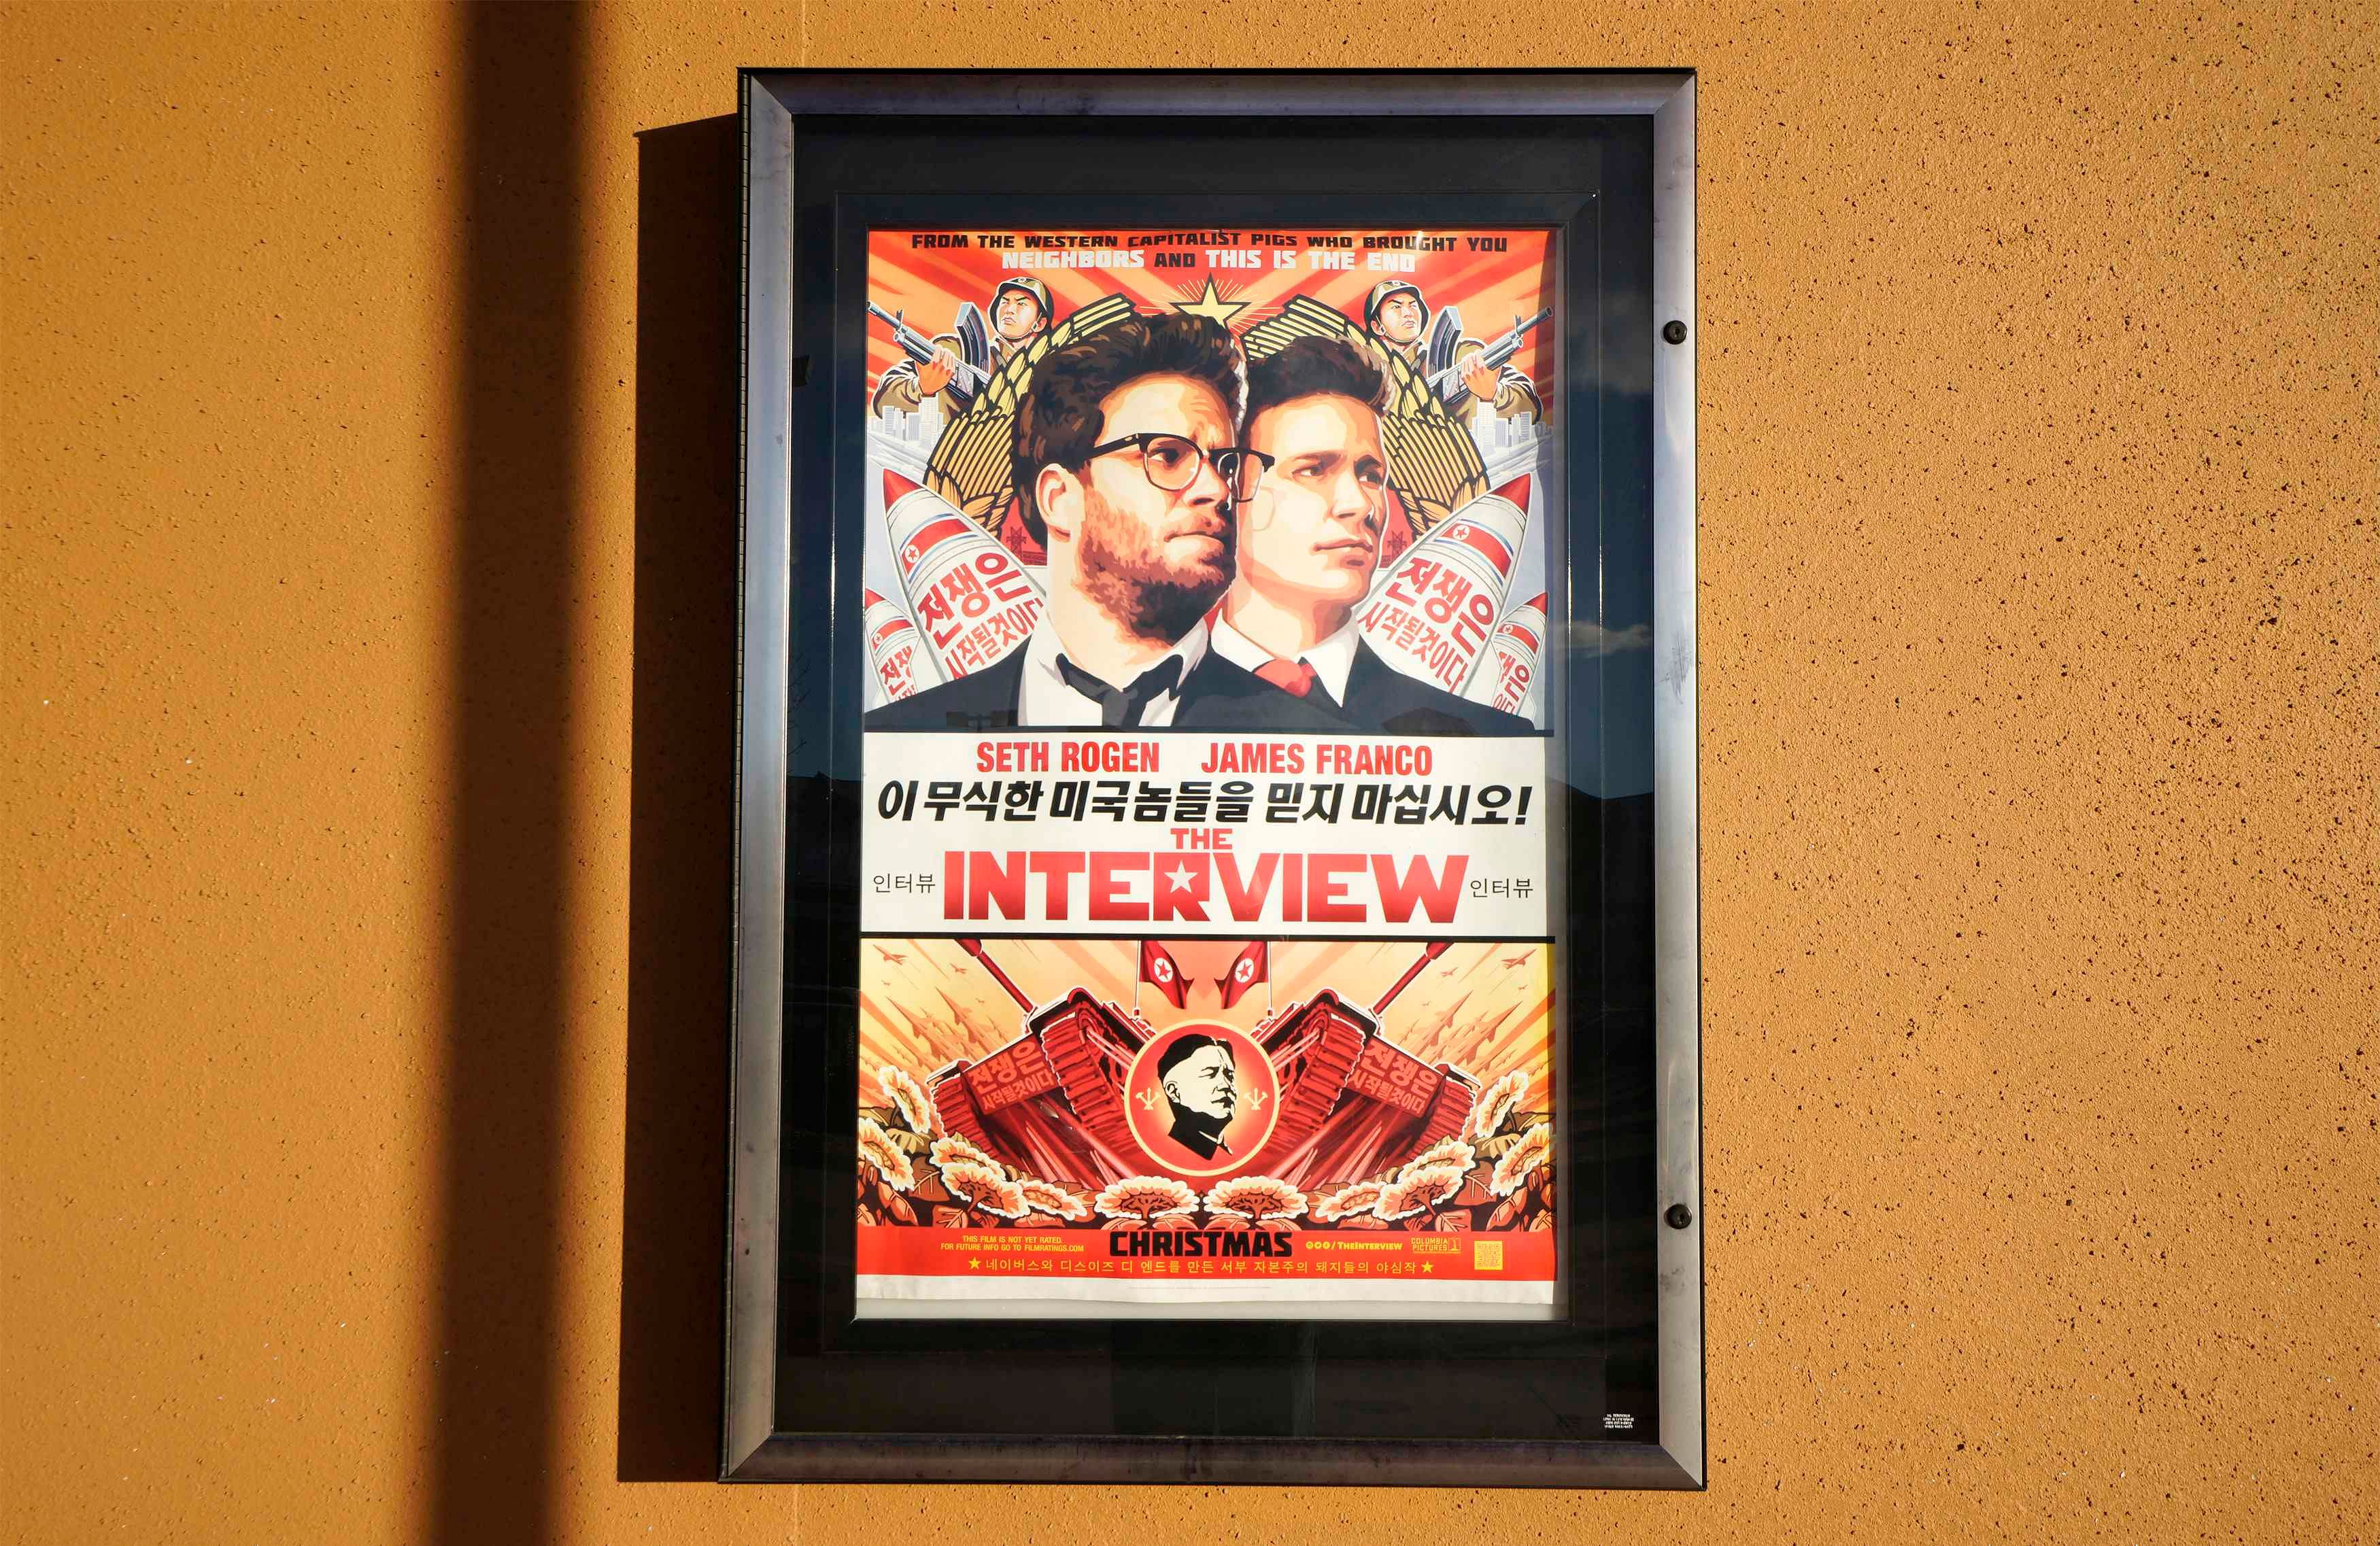 The poster for the film "The Interview" is seen outside the Alamo Drafthouse theater in Littleton, Colorado December 23, 2014. Photo: Reuters